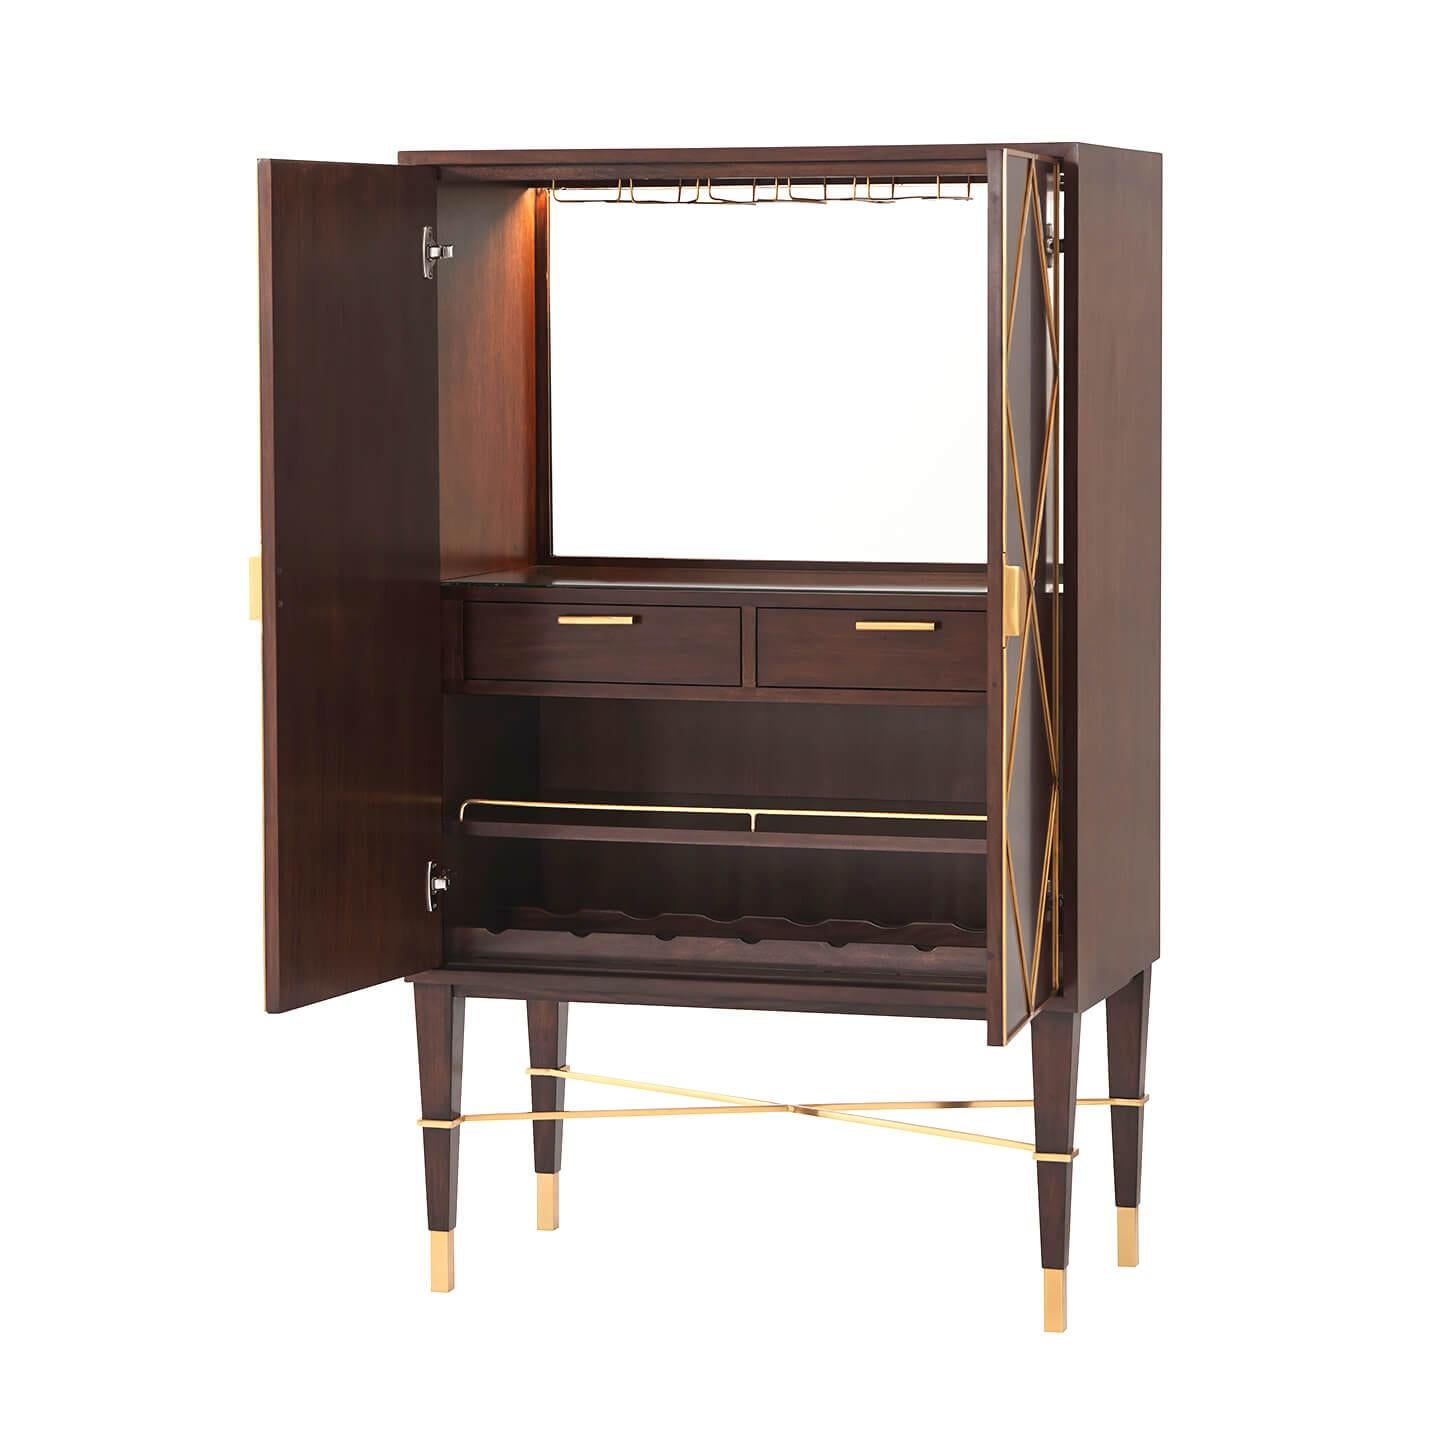 An intoxicating Mid-Century Modern bar cabinet. Mahogany parquet door fronts are overlaid with geometric brass diamond trim and Y handles. Set on square tapered legs with a brass X stretcher. Inside, the liquor cabinet is LED-lit with a mirror back,